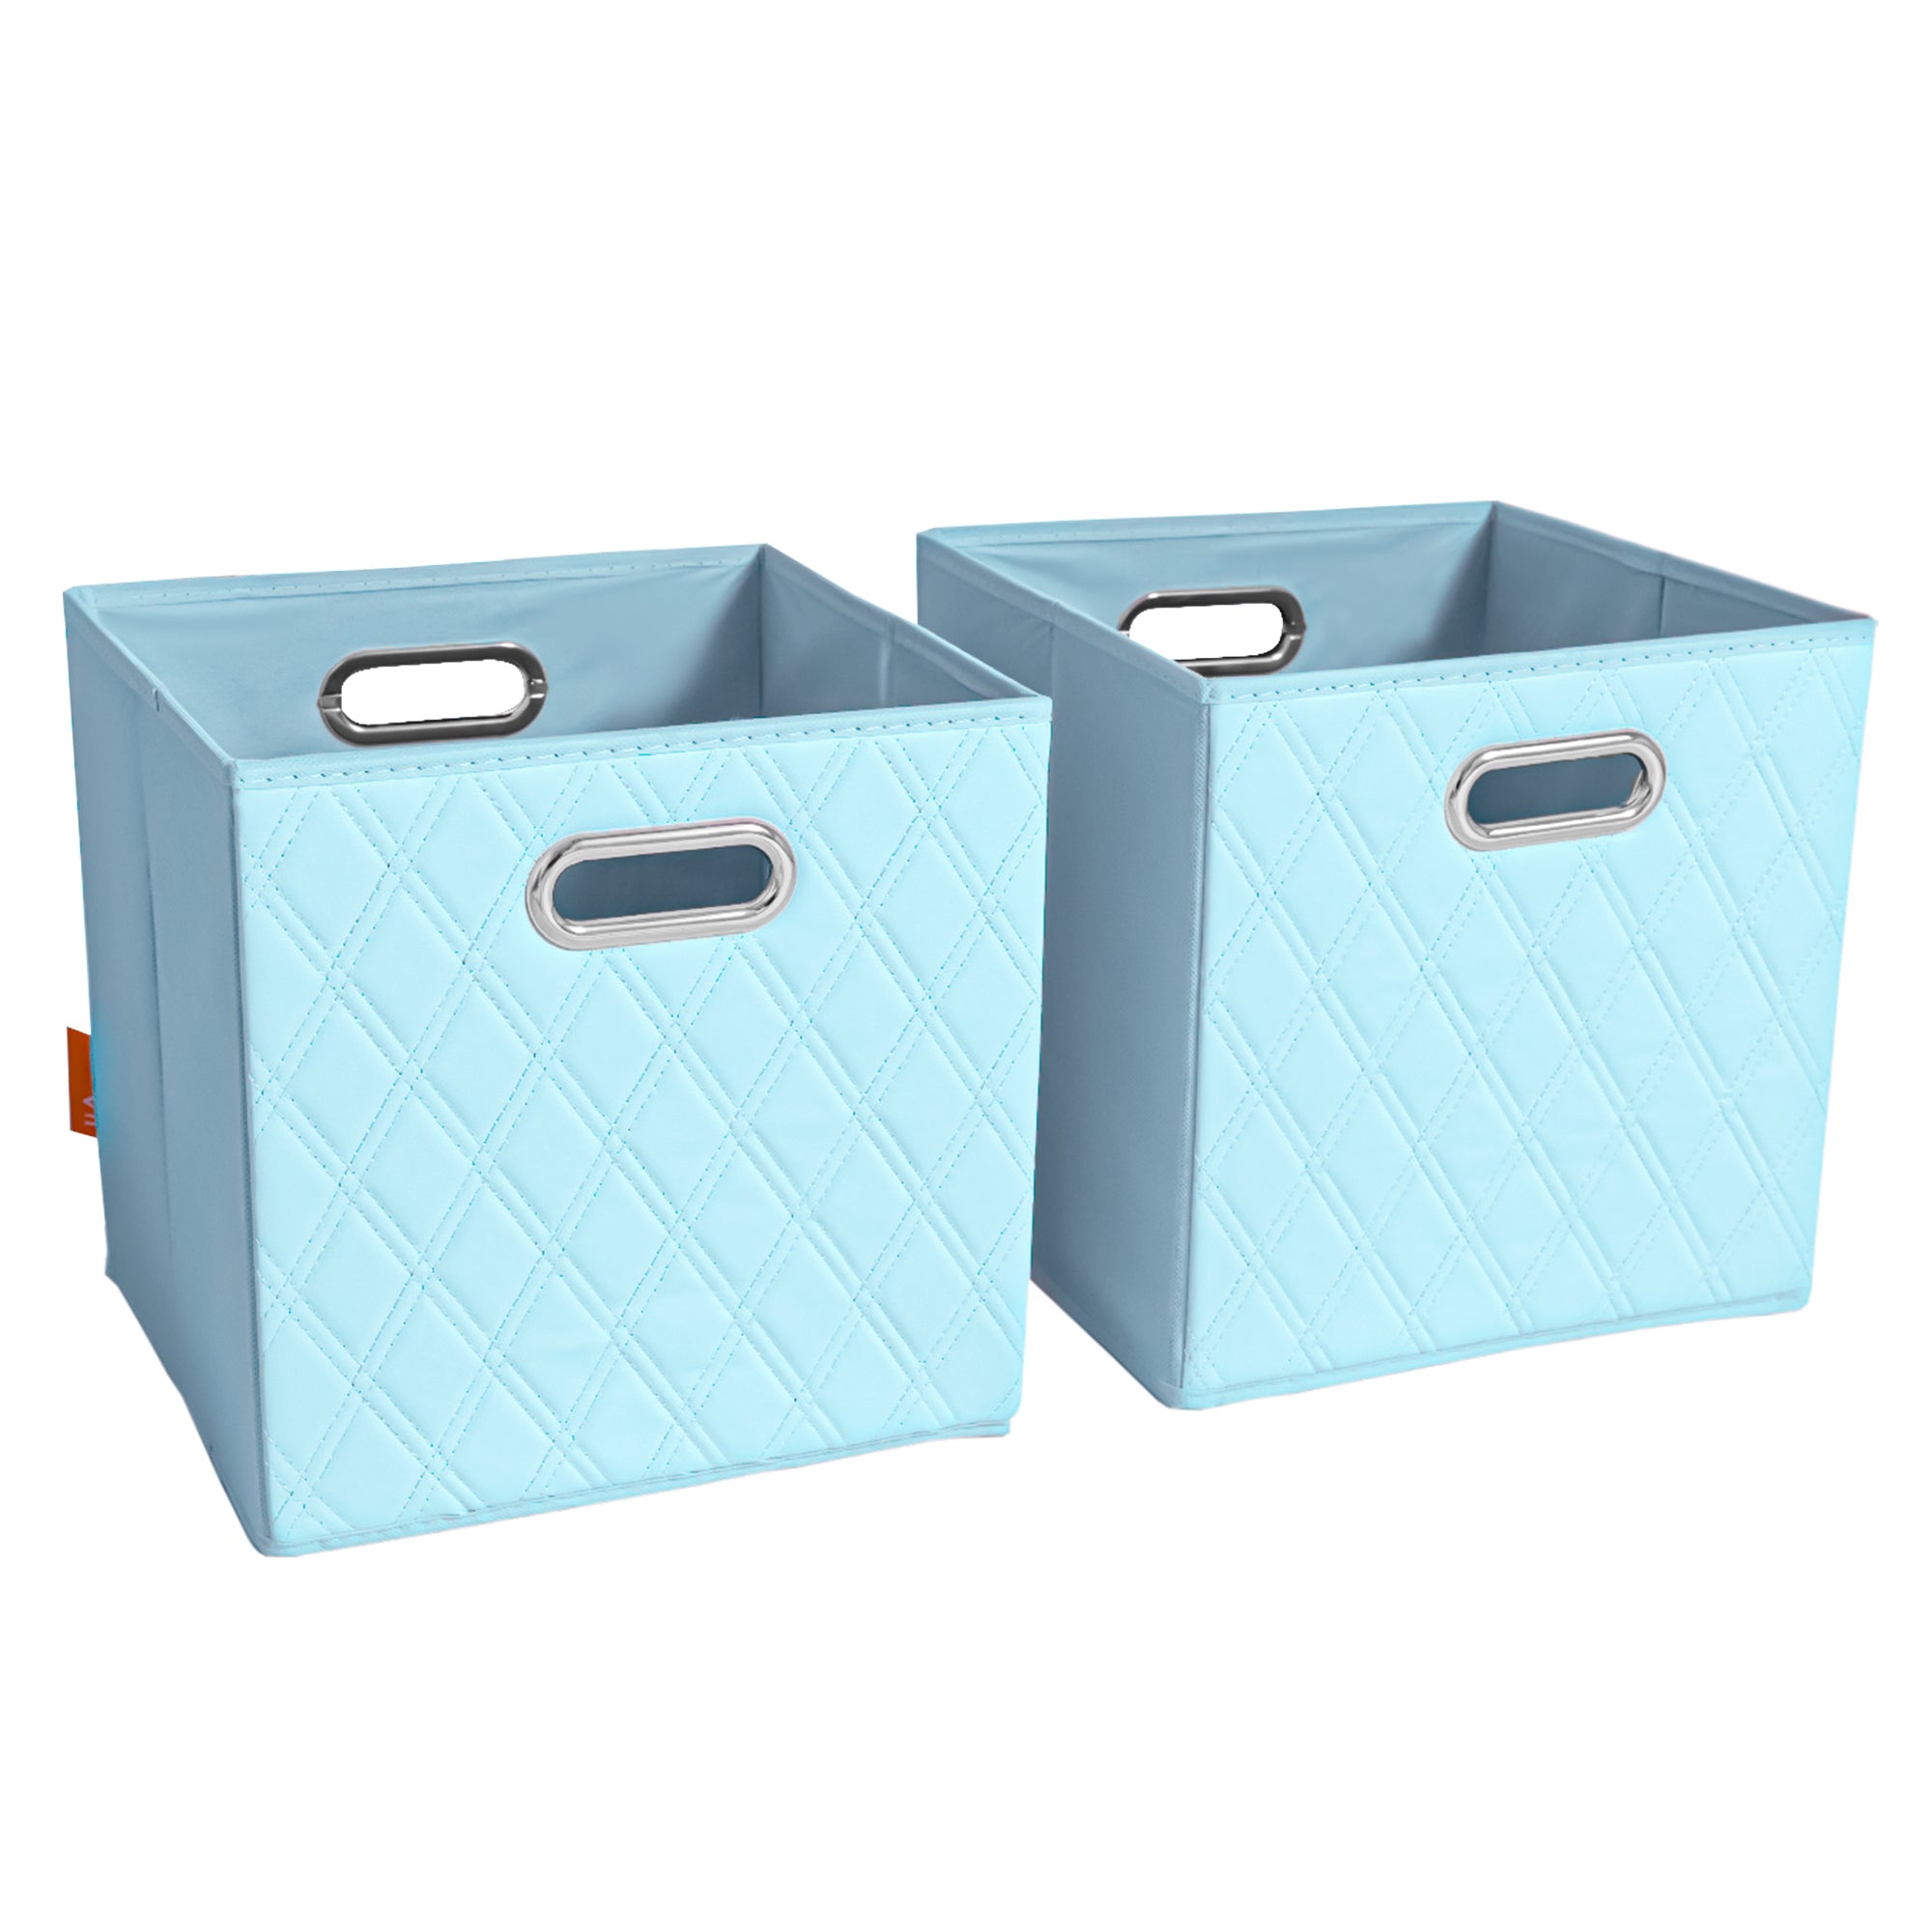 JIAessentials 11 inch Foldable Diamond Patterned Faux Leather Storage Cube Bins Set of Two with Dual Handles - 11" Blue